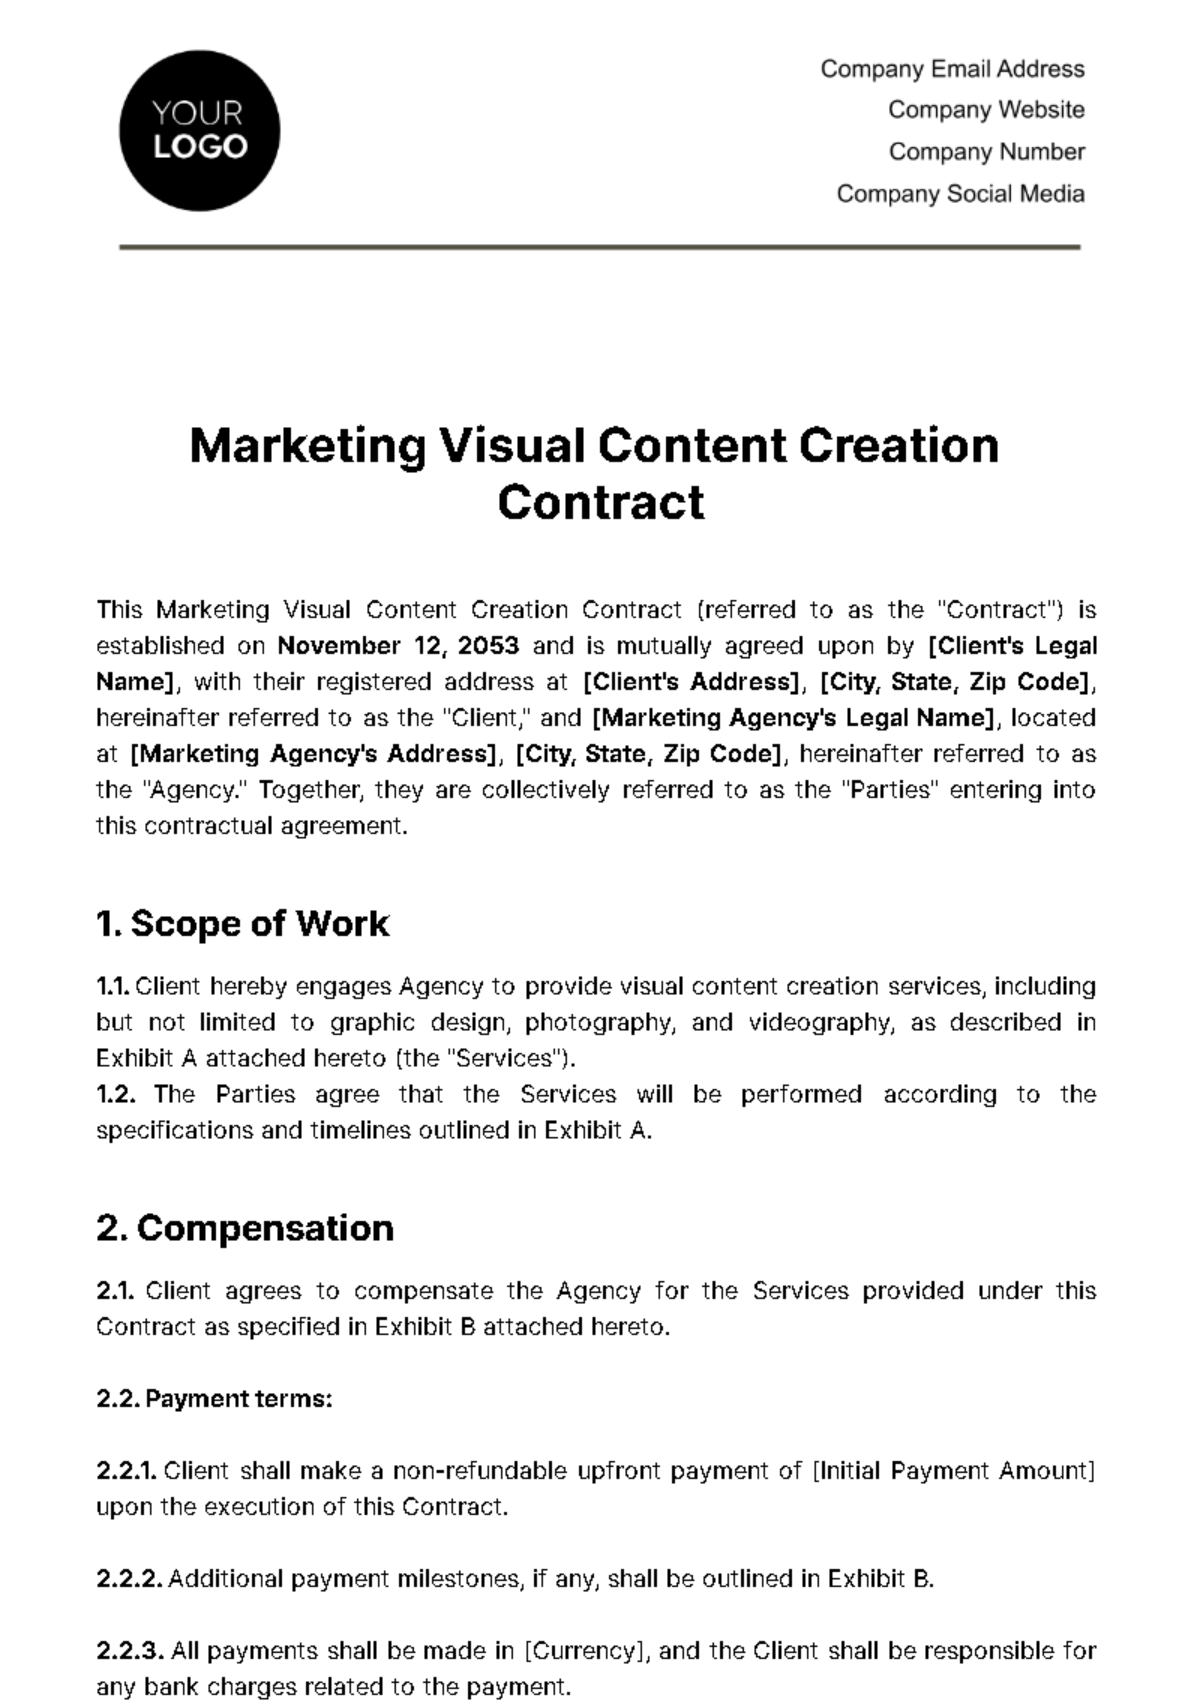 Free Marketing Visual Content Creation Contract Template